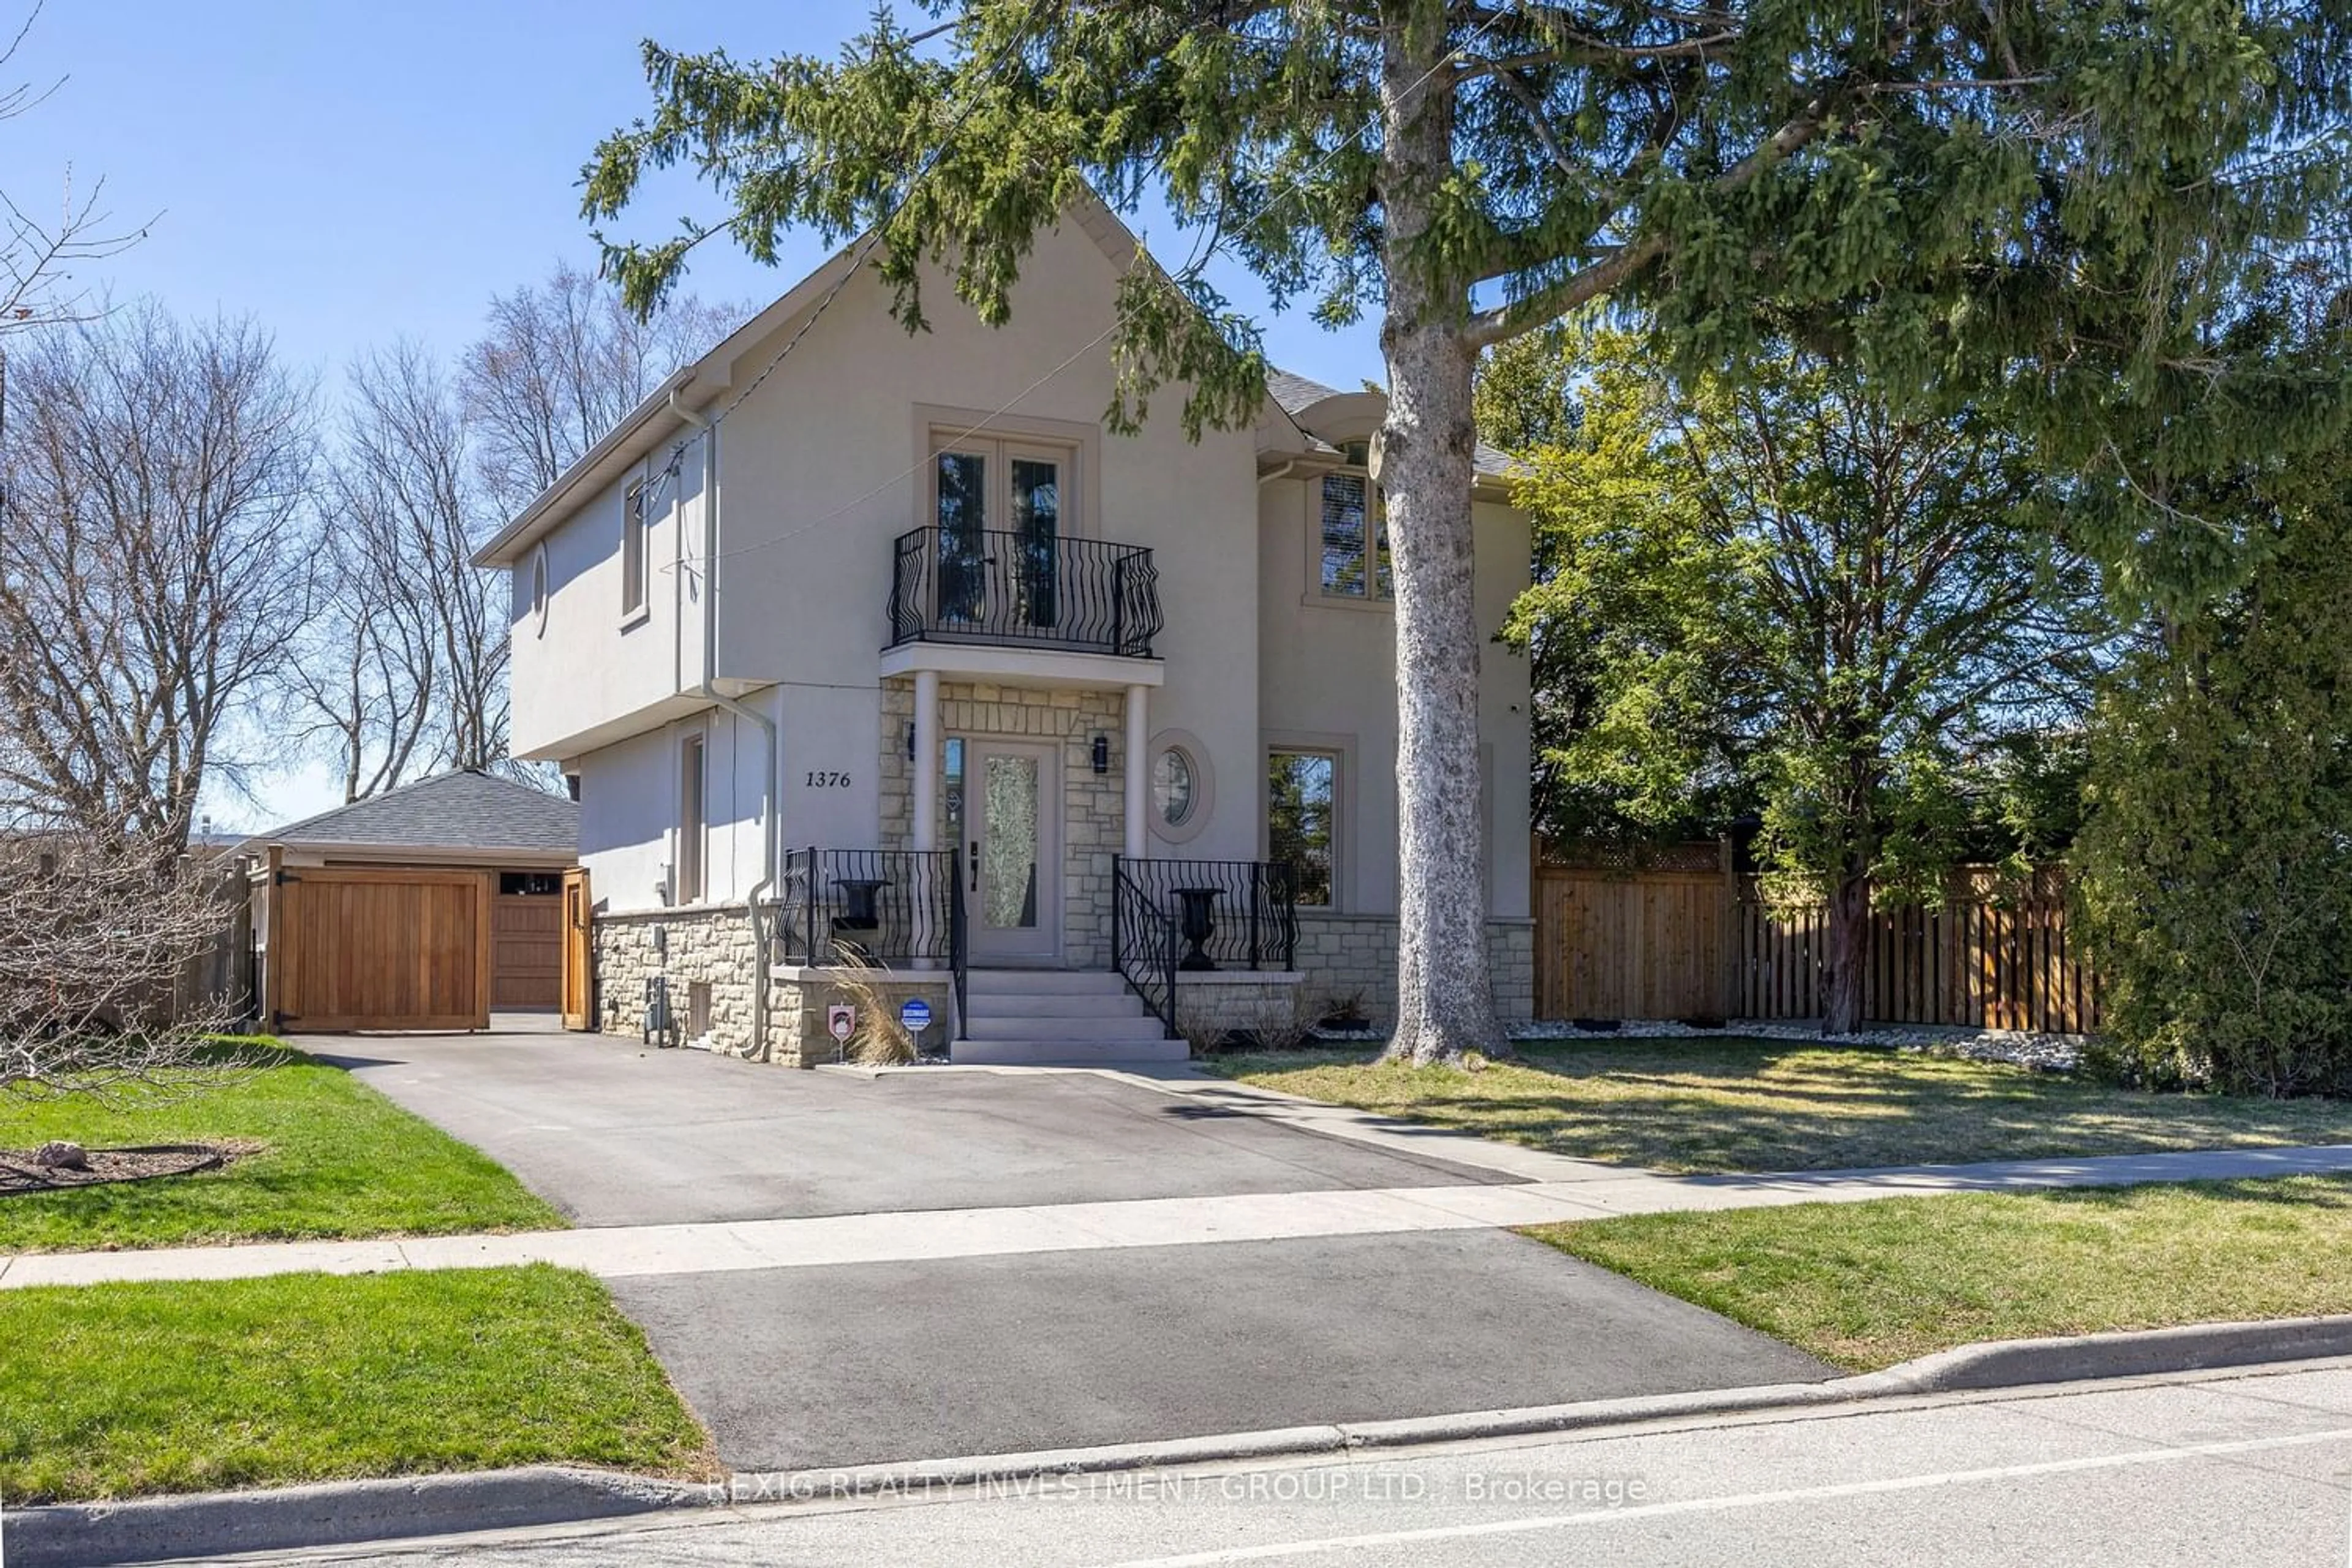 Frontside or backside of a home for 1376 Northaven Dr, Mississauga Ontario L5G 4E9